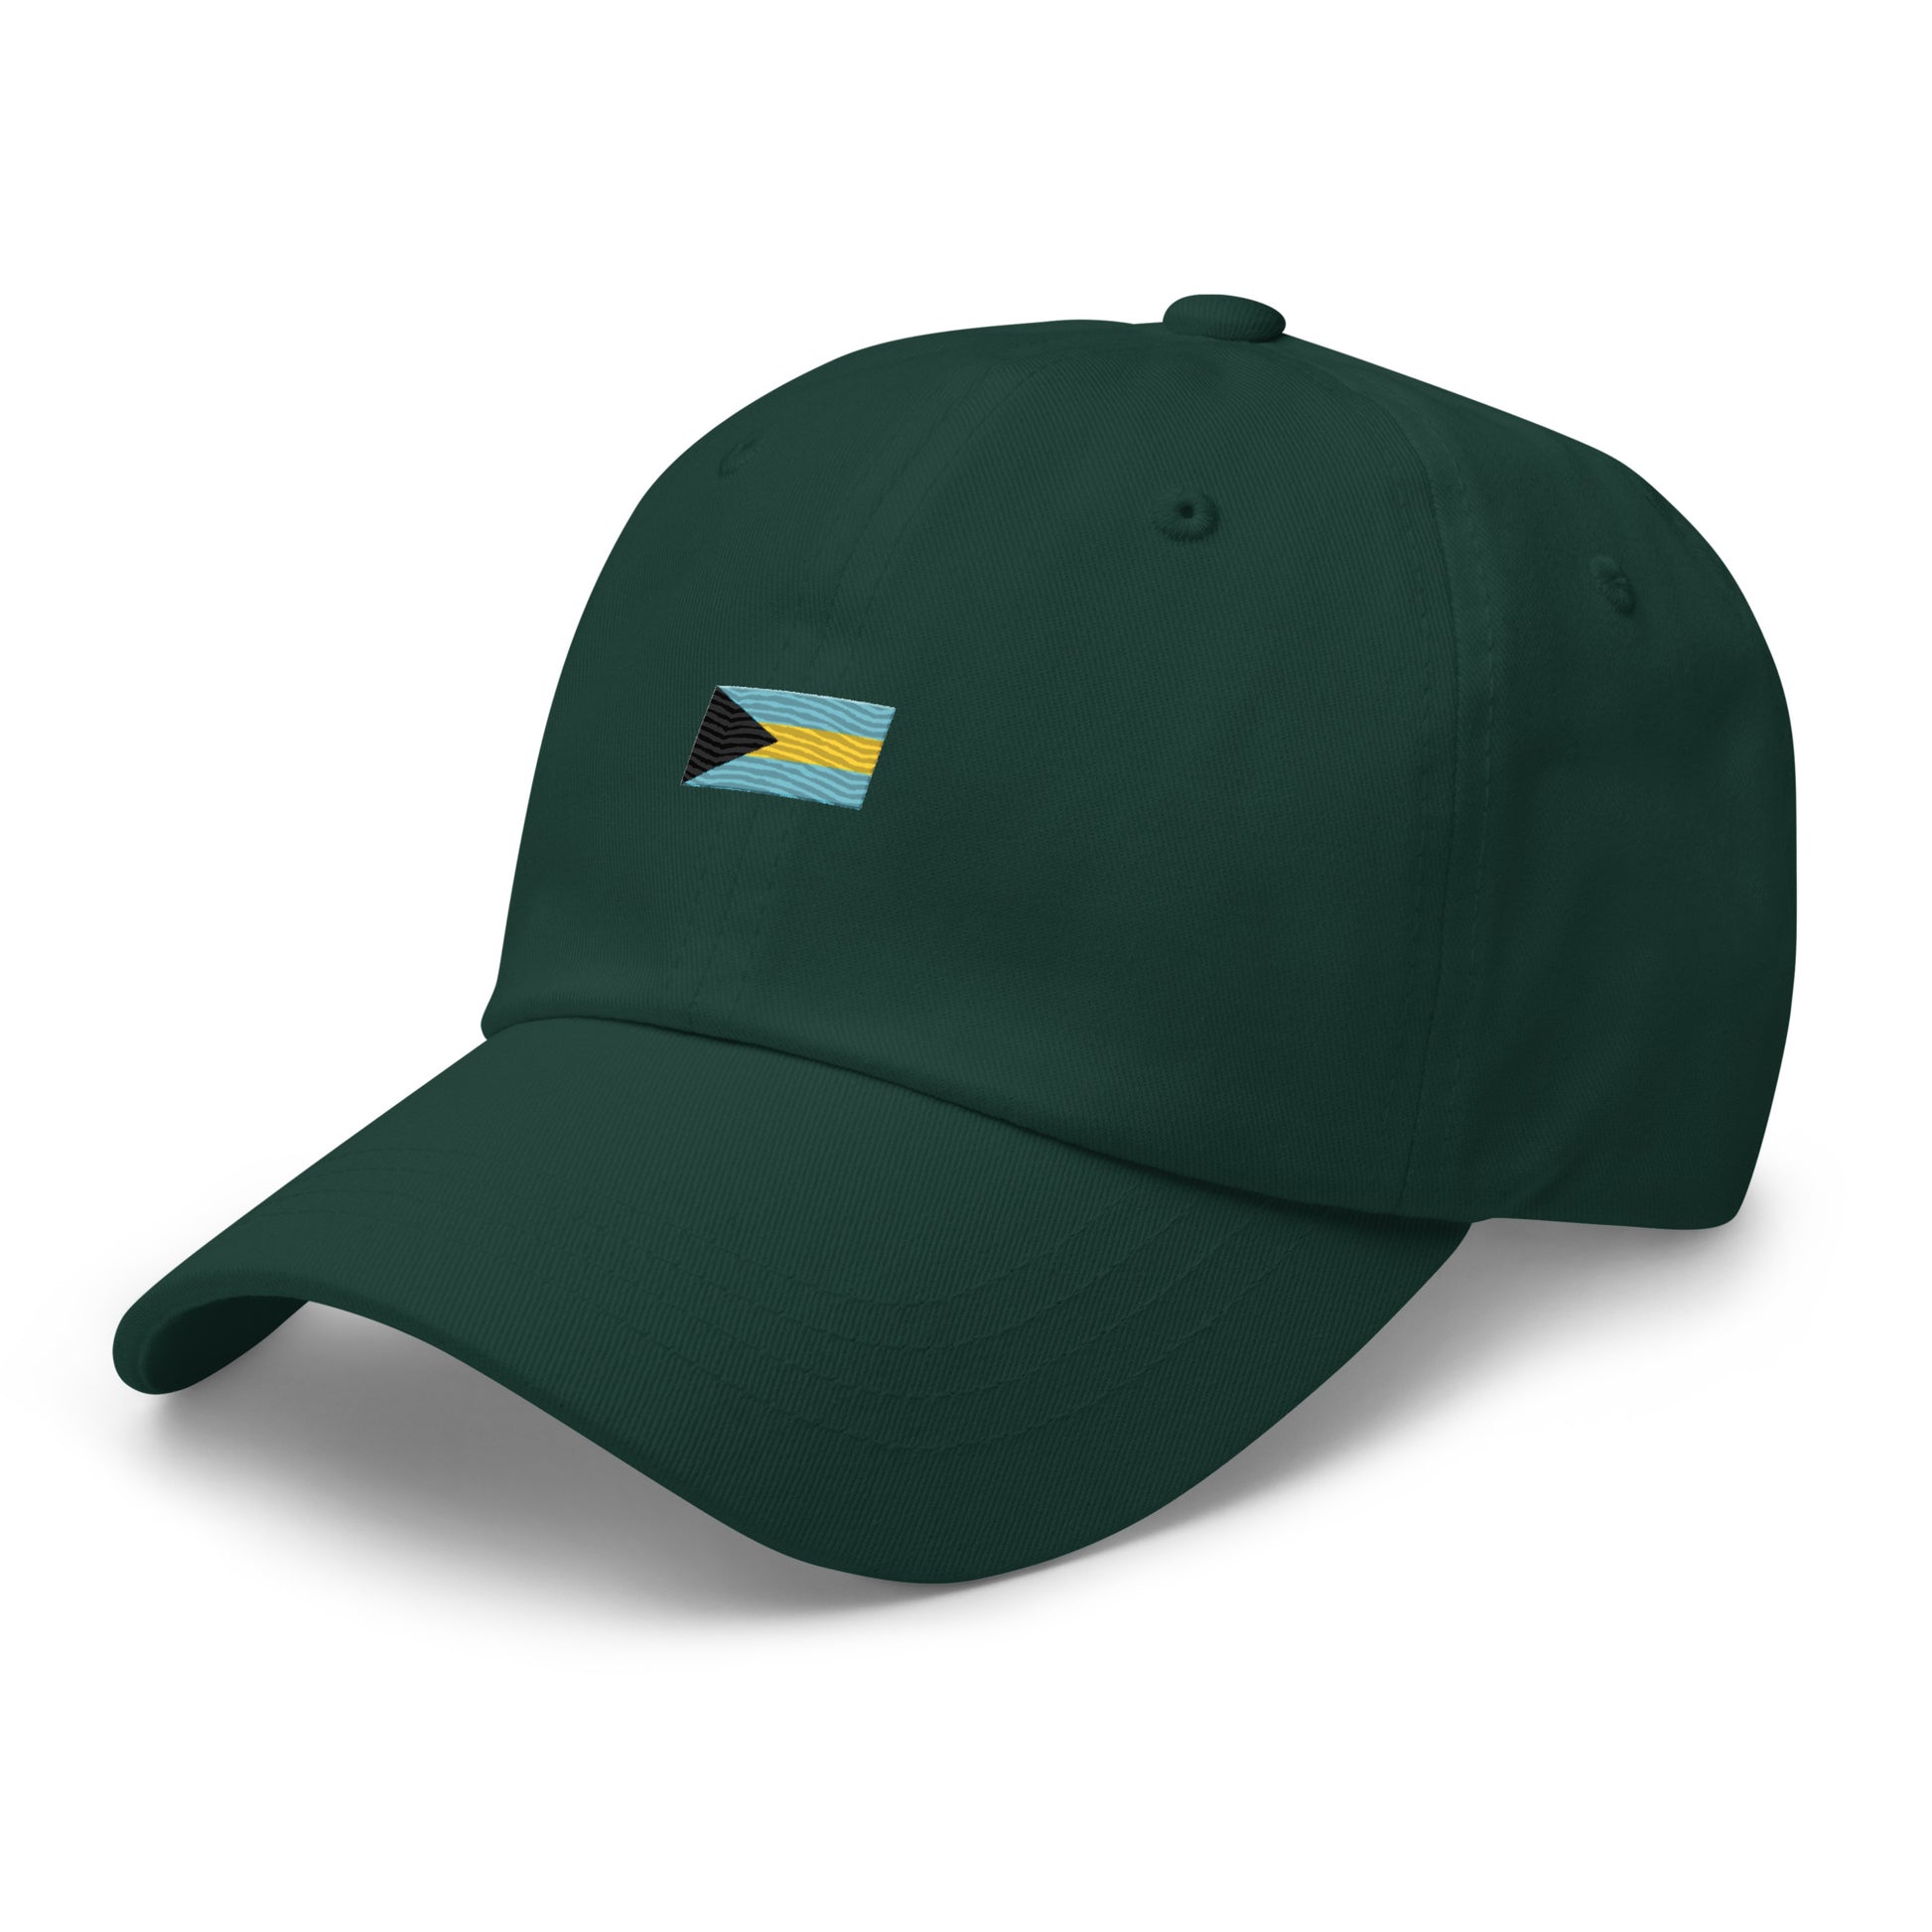 cap-from-the-front-with-bahamian-flag